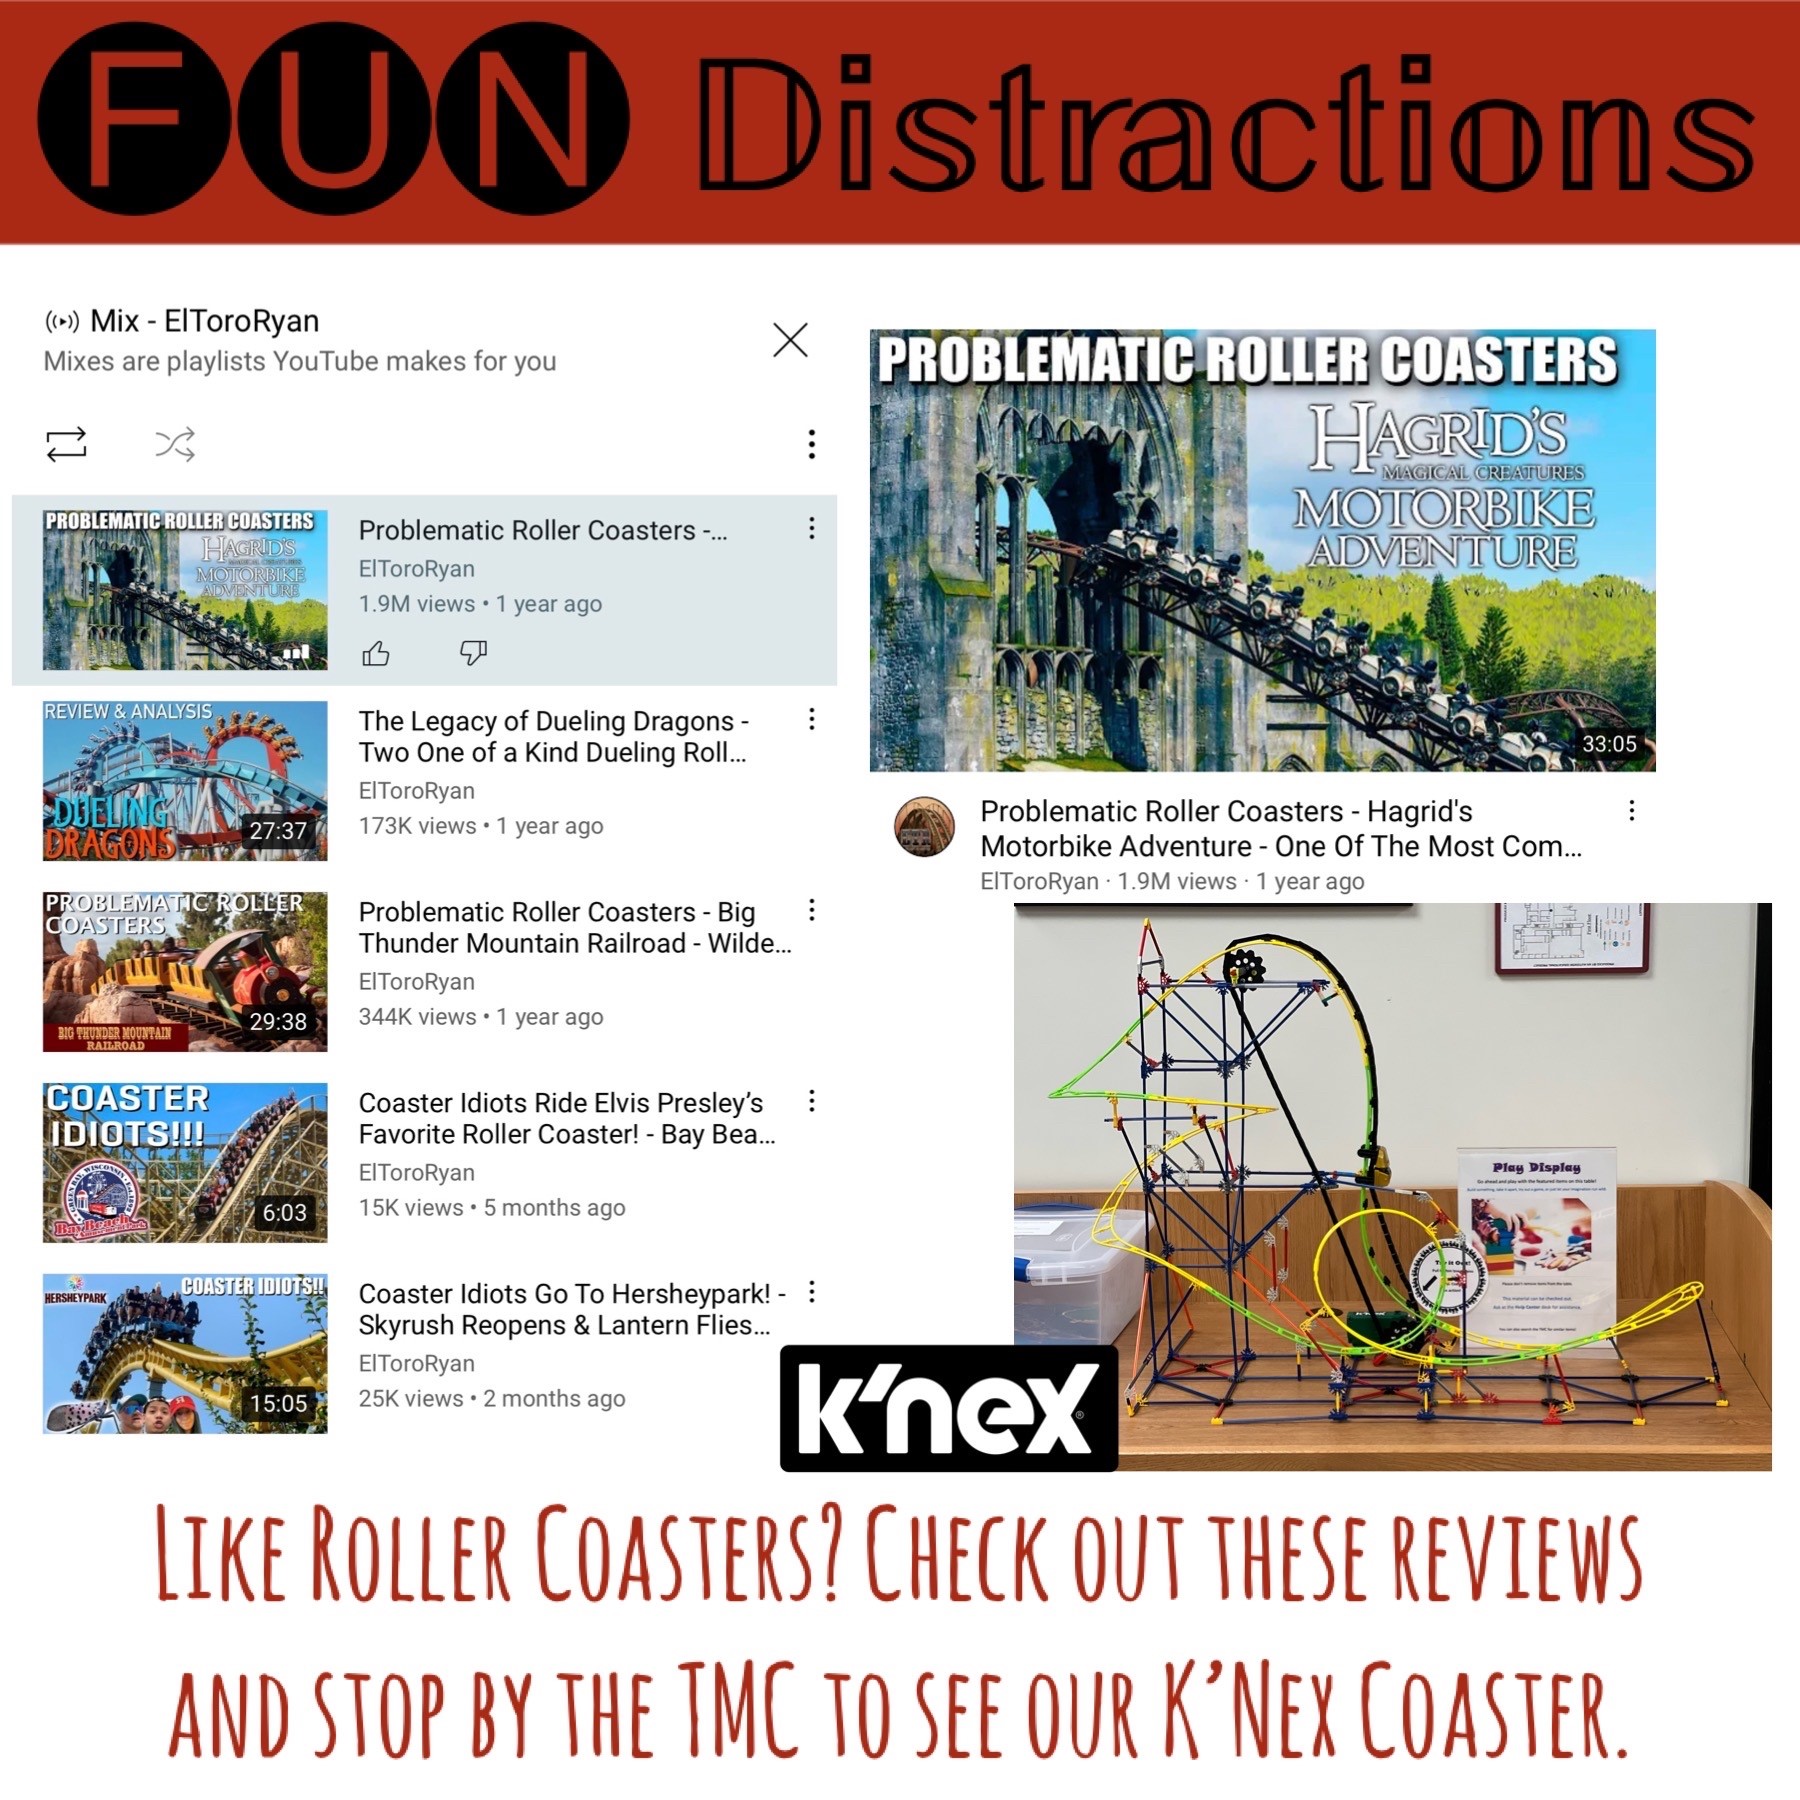 : Image advertising the Library's FUN Distractions series post on Roller Coasters